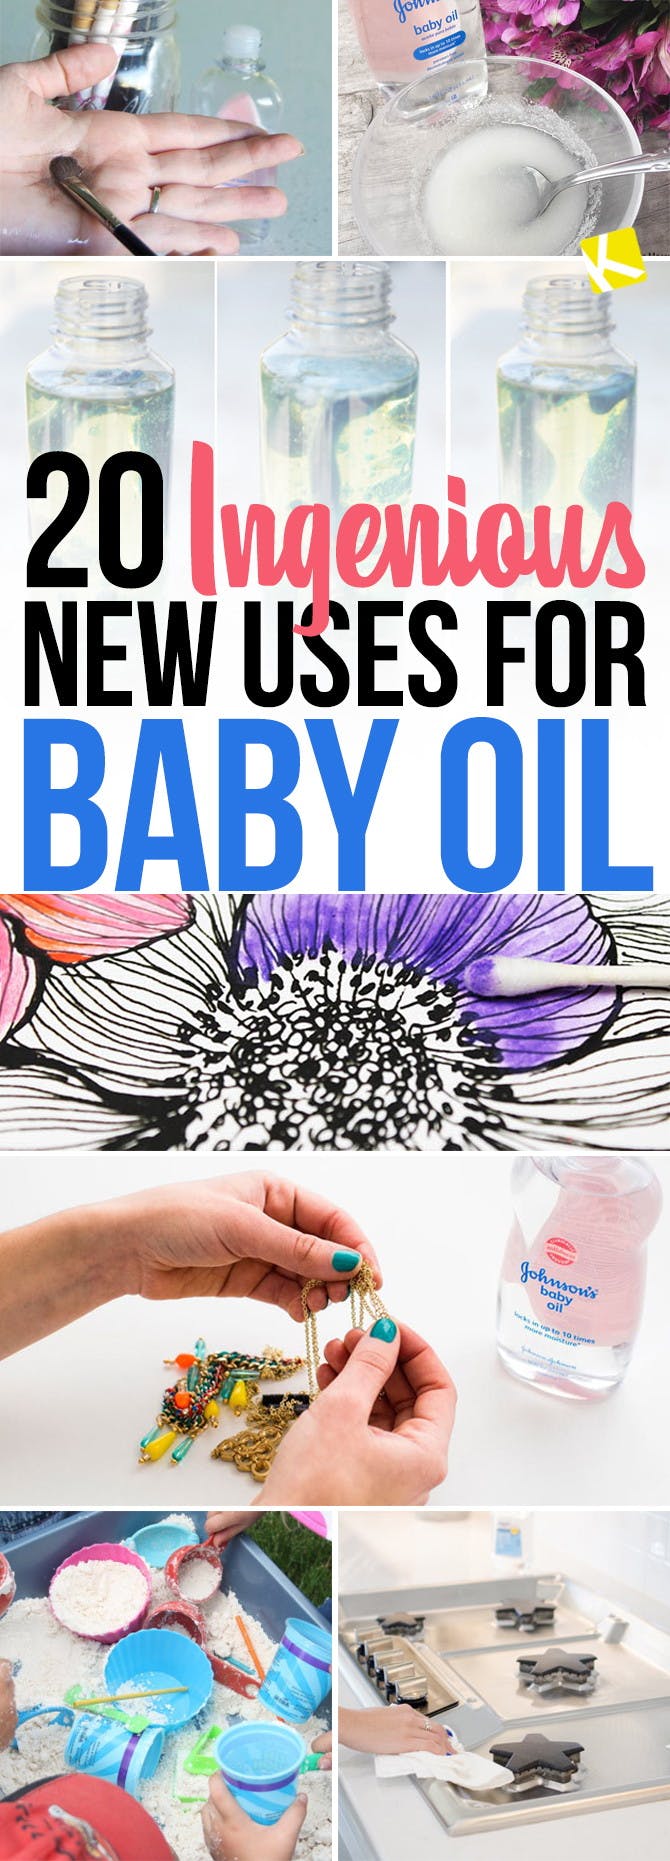 20 Ingenious New Uses for Baby Oil You've Never Heard Of